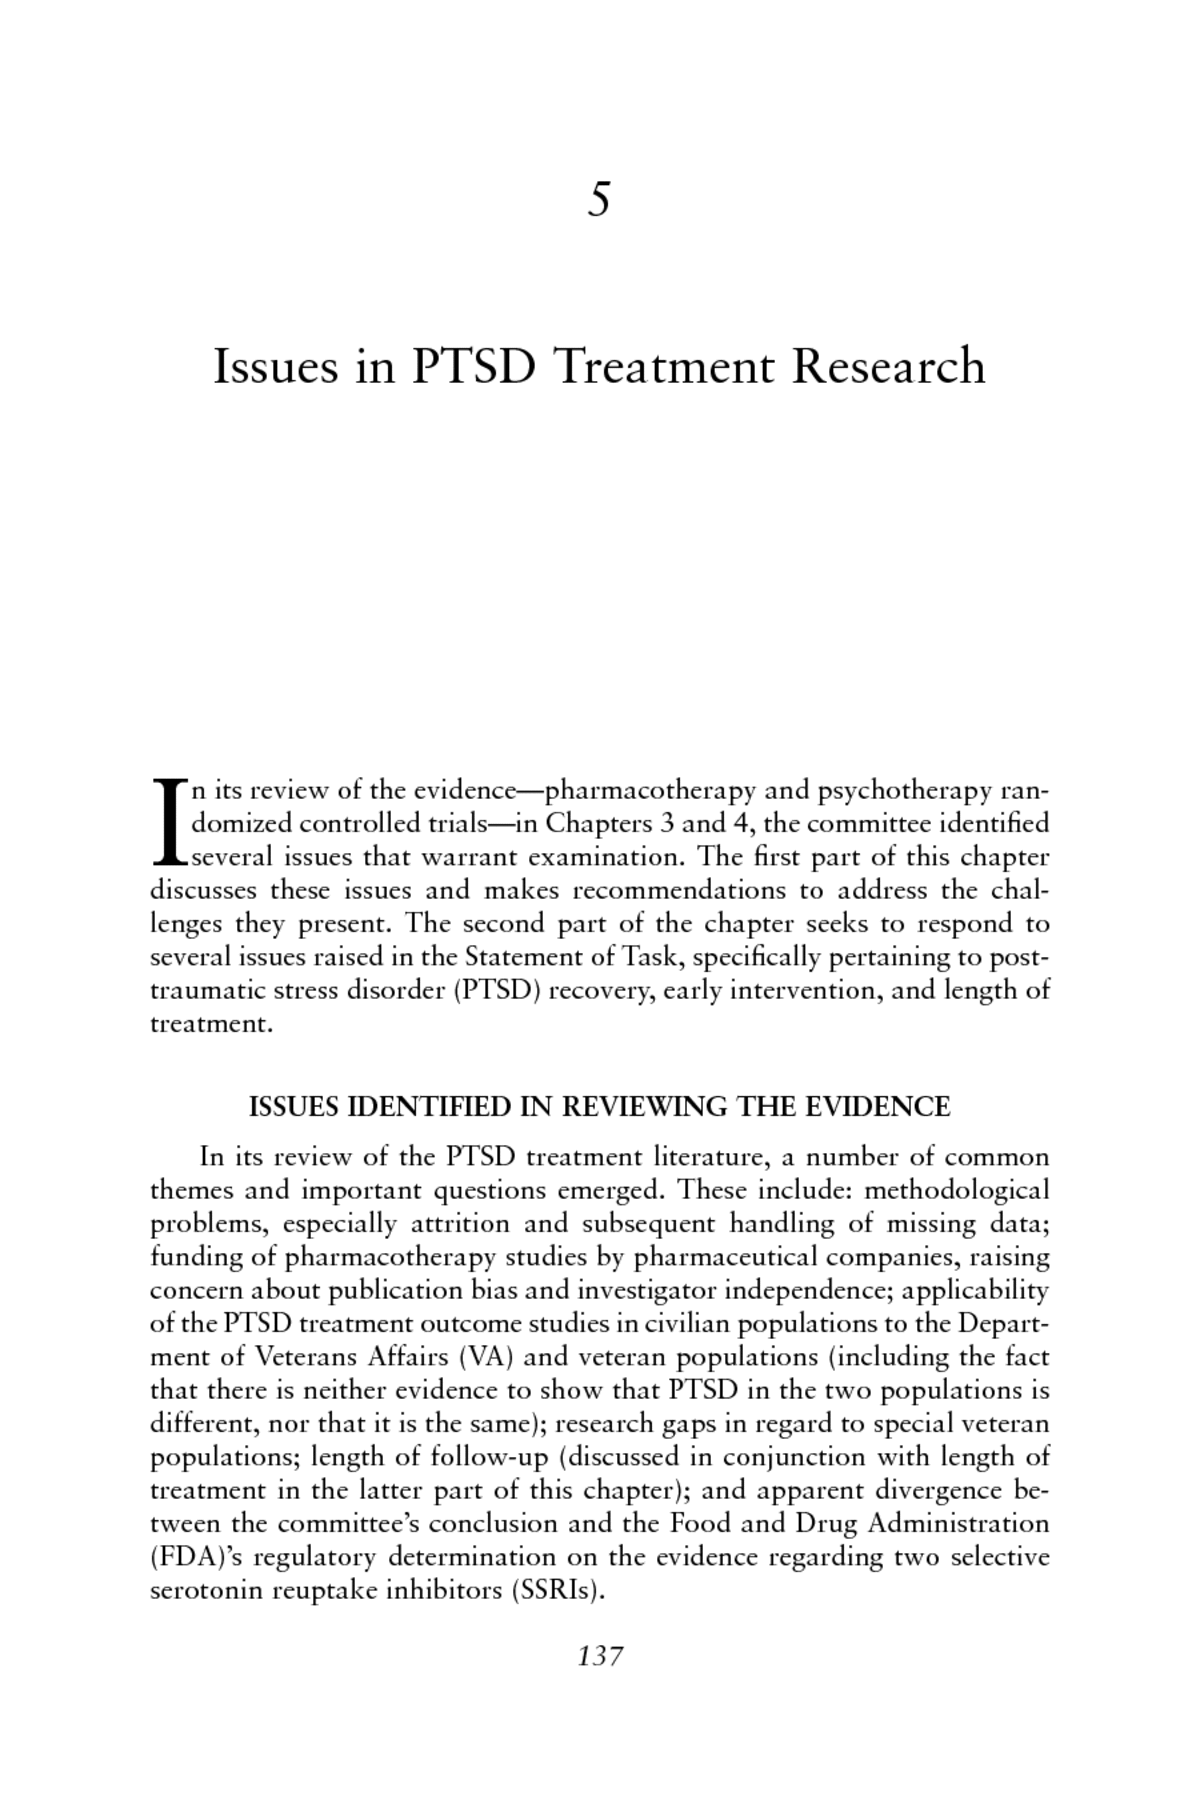 thesis statement about ptsd